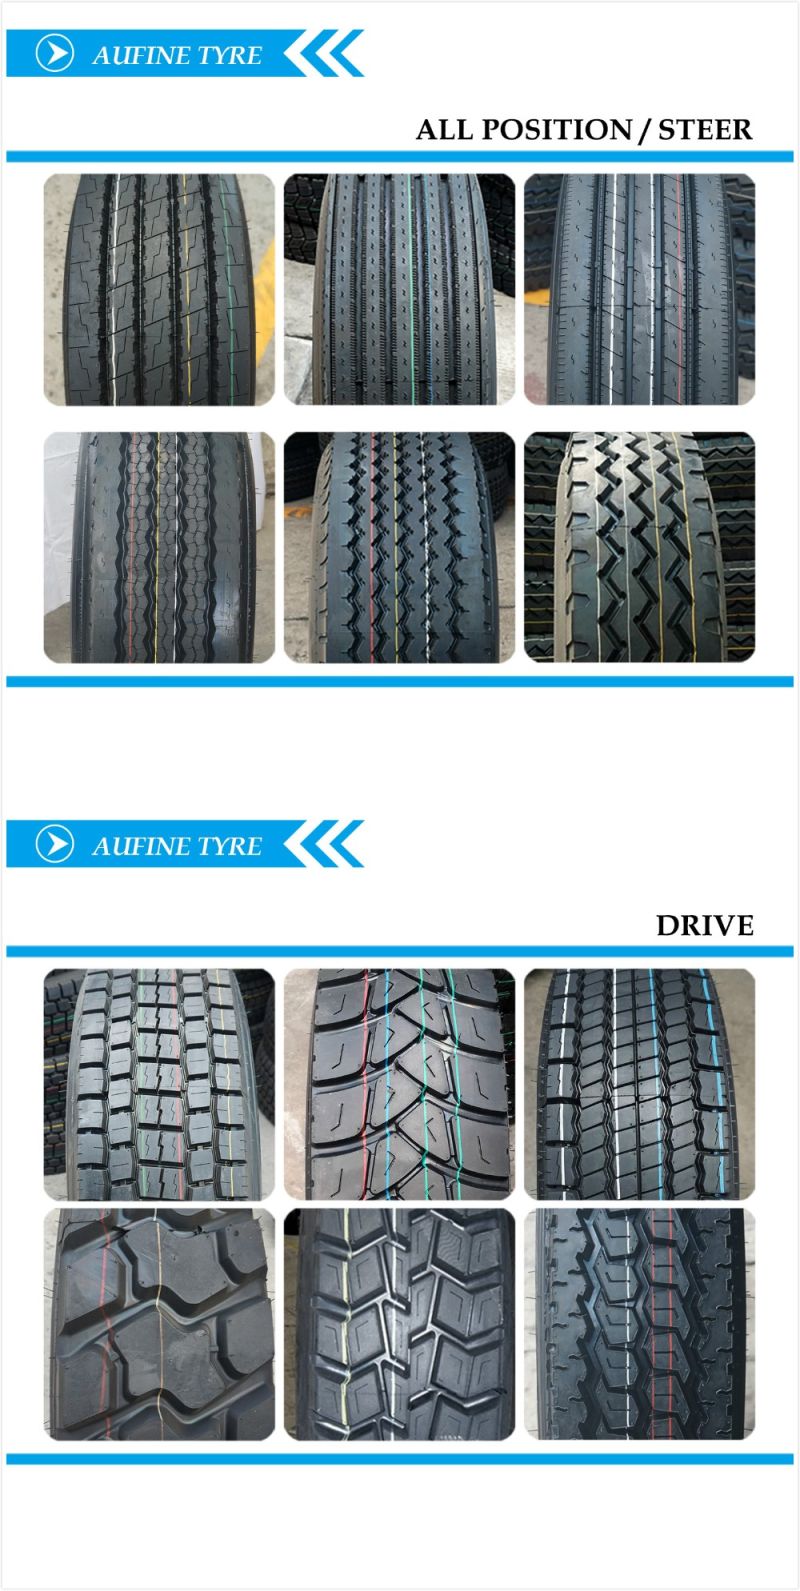 Popular Tyre Pattern for Drive Position with Long Span Life